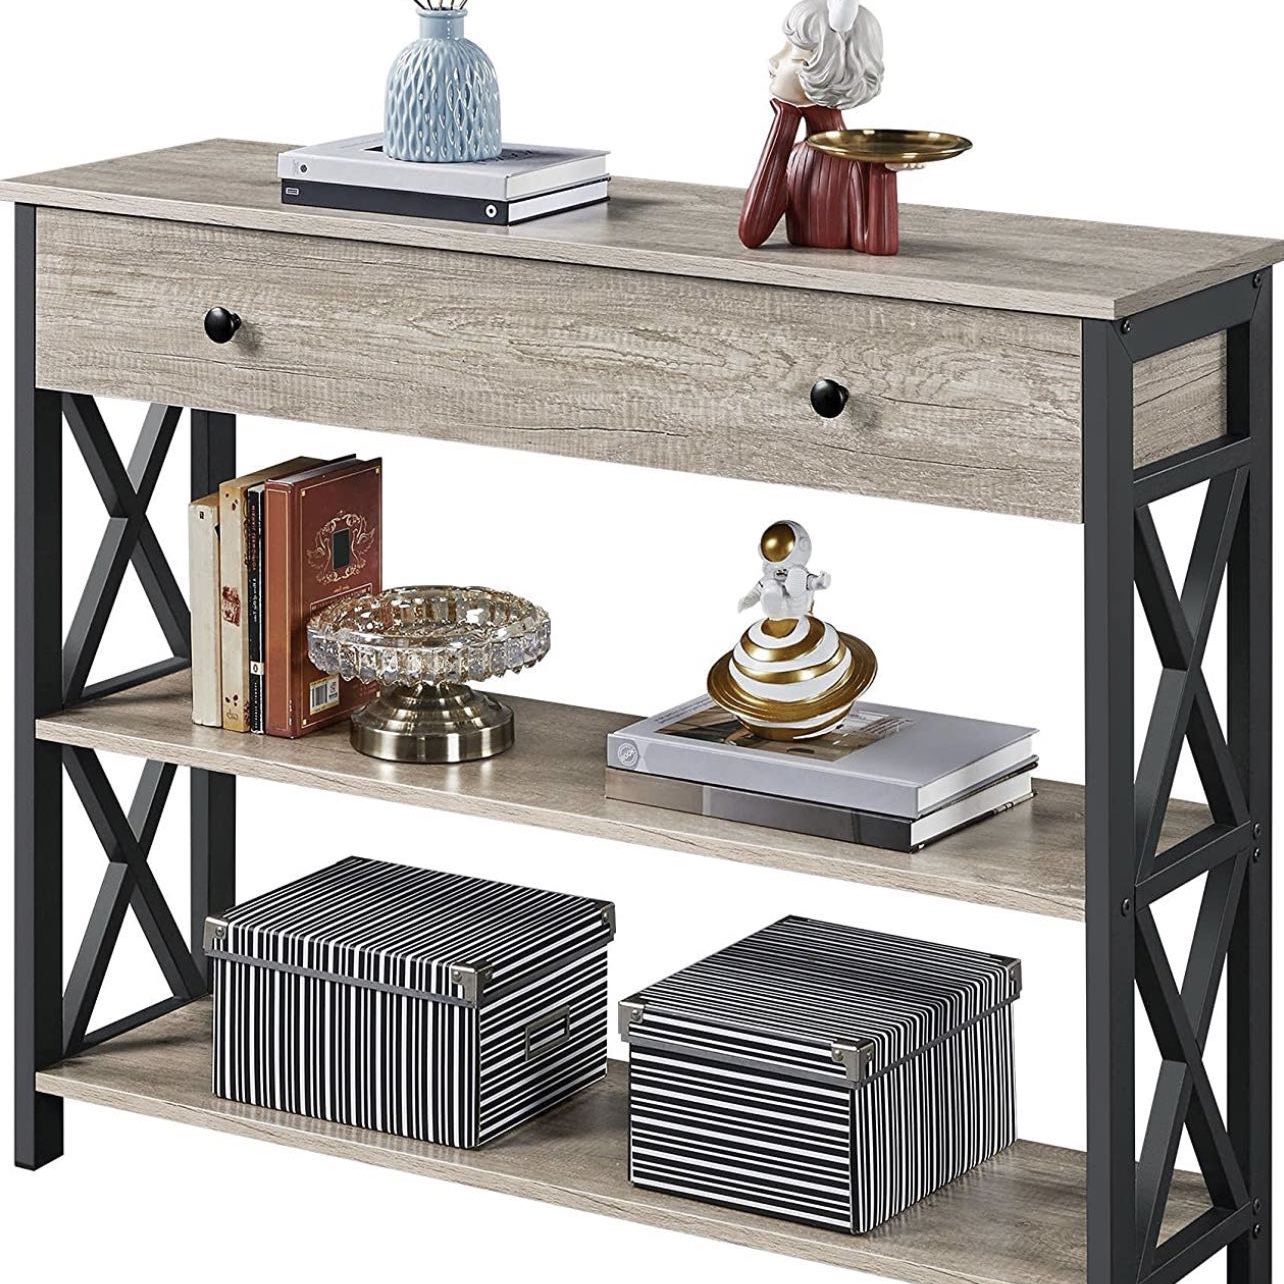  Console Table with Drawer for Entryway, Narrow Entry Table for Living Room with Drawer & Open Storage, Industrial Wood Hallway Sofa Table with Stable